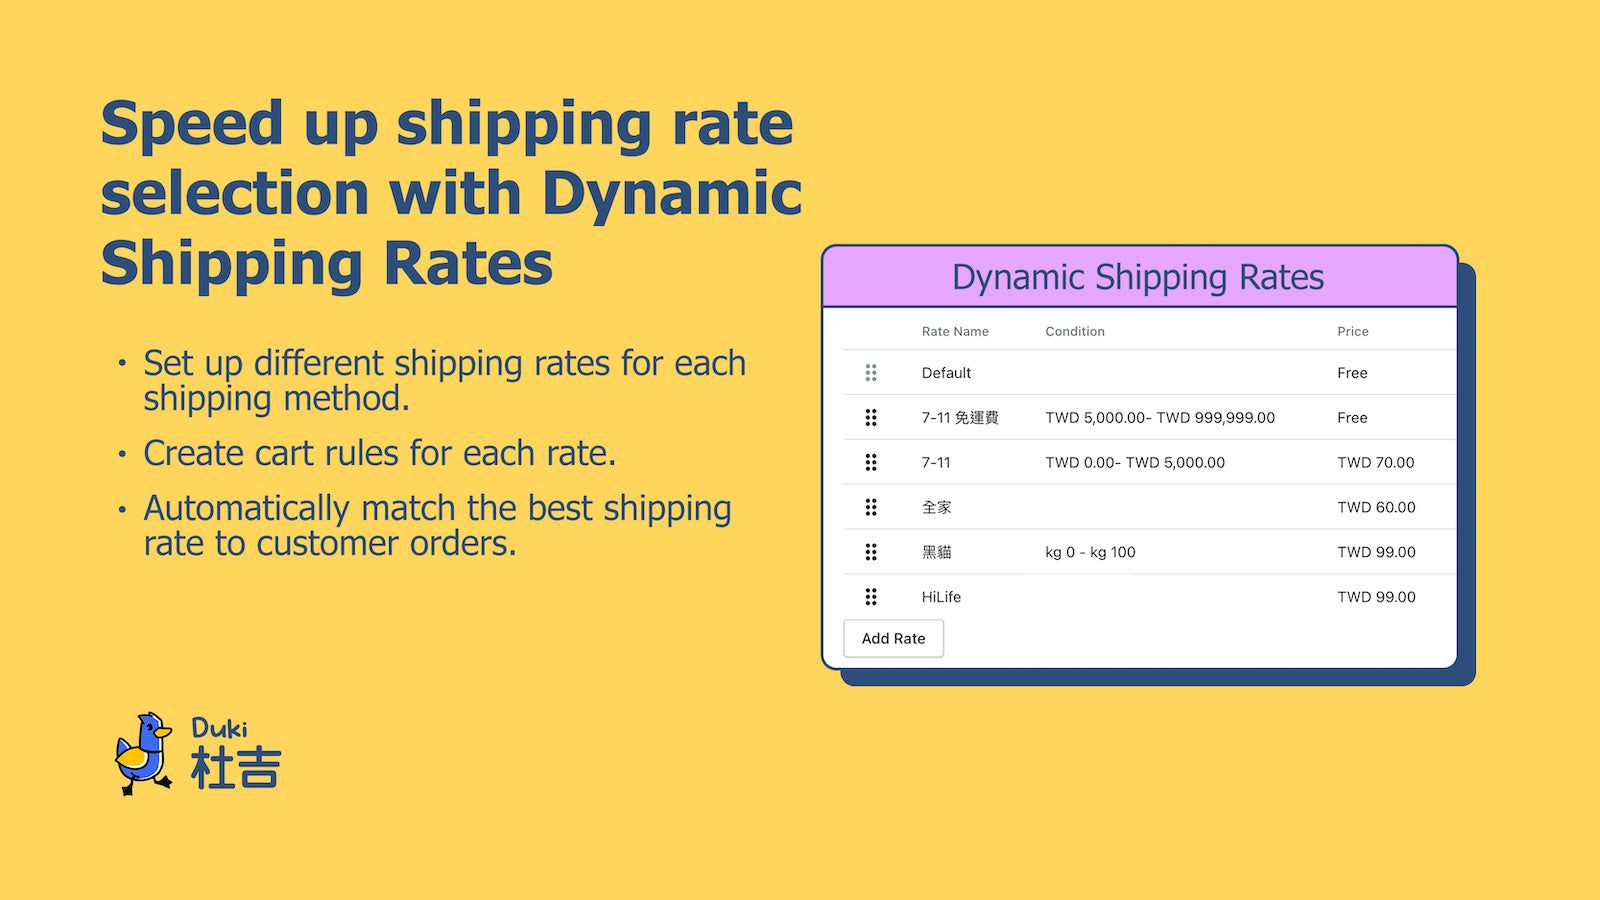 Speed up shipping rate selection with Dynamic Shipping Rates.